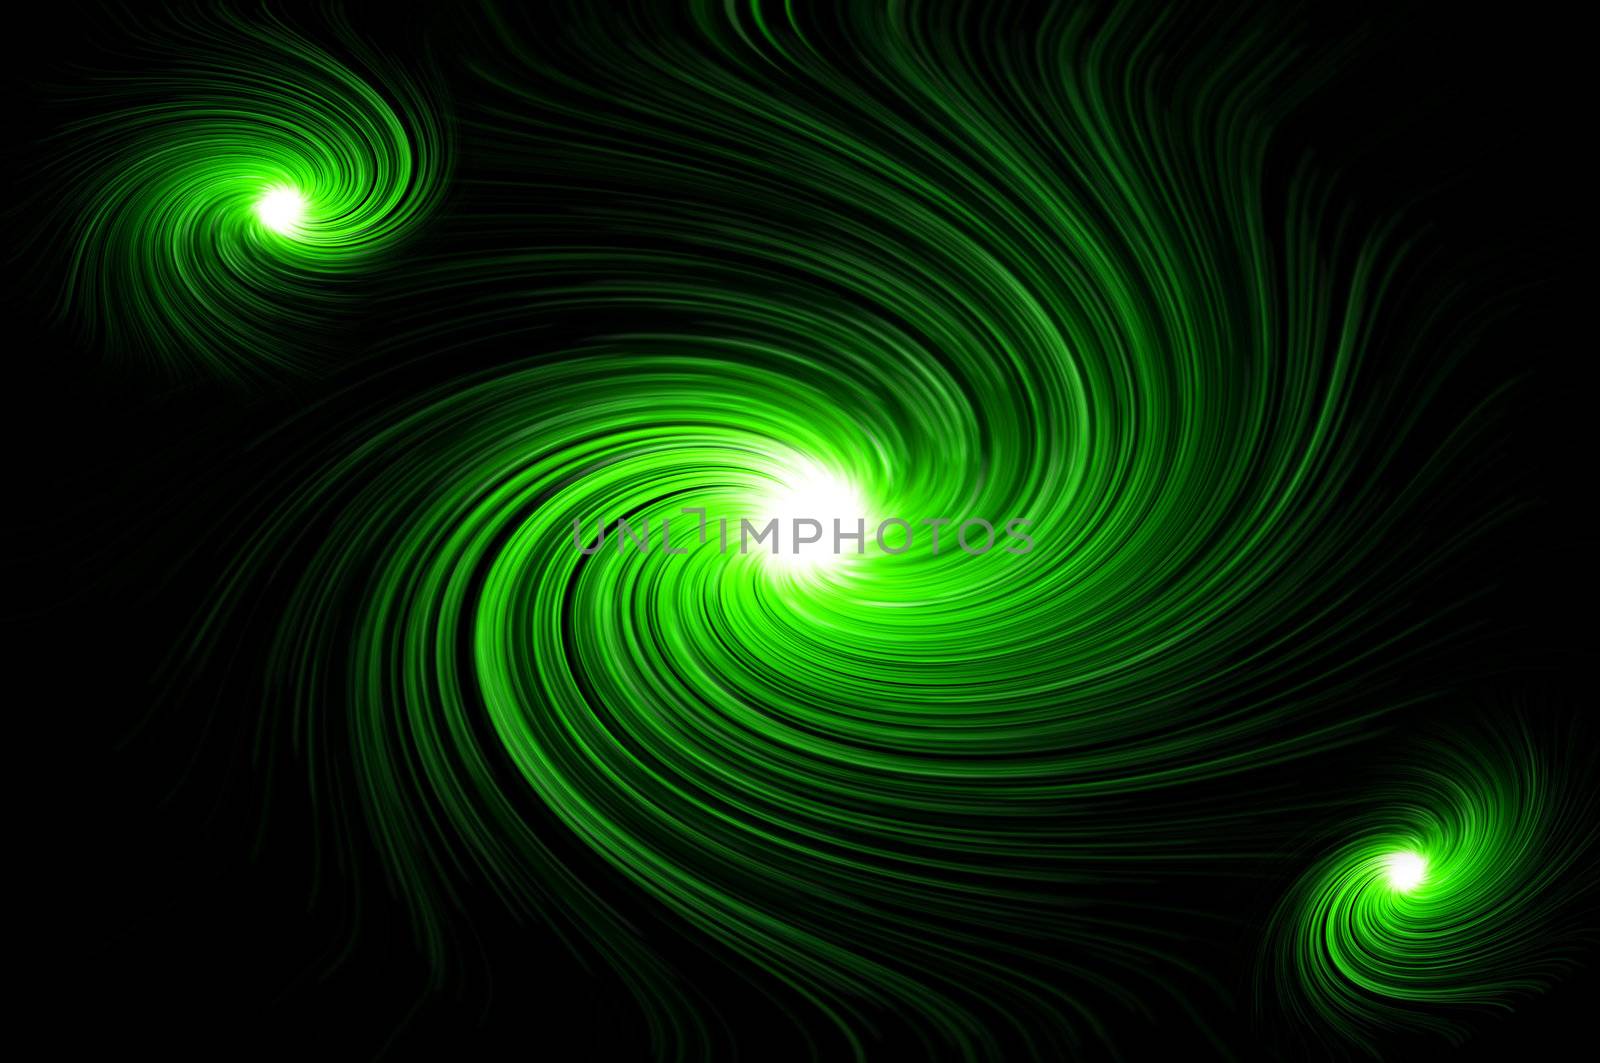 Abstract green swirling lights against black background.